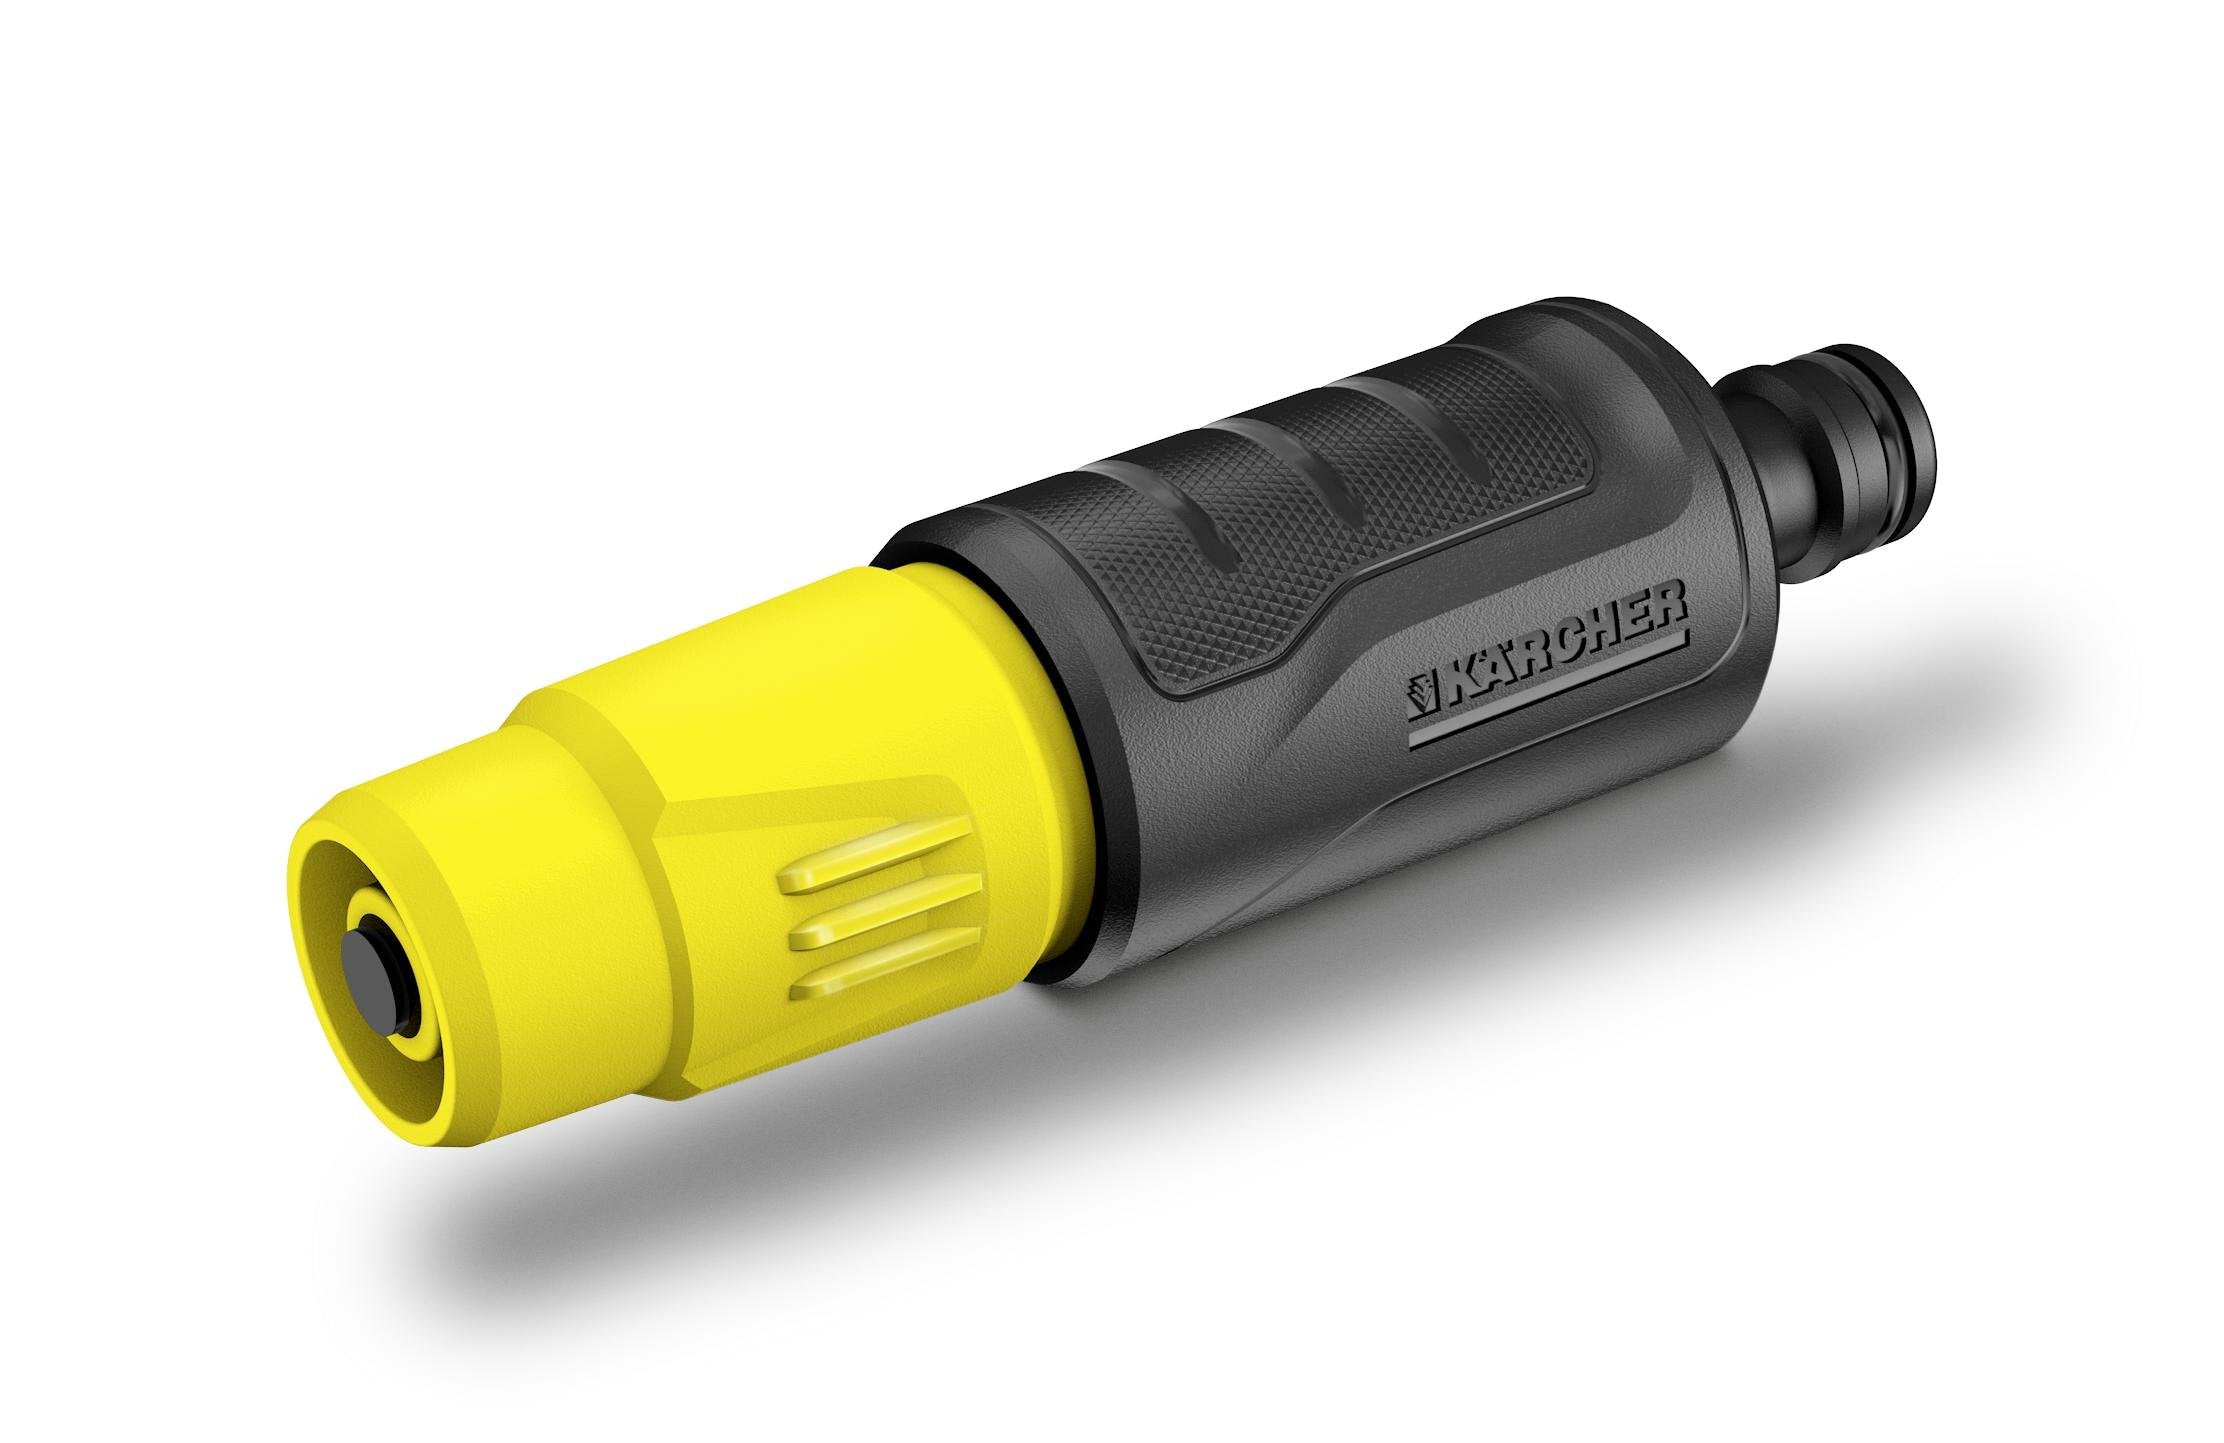 Karcher - Nozzle Set, Includes Spray Nozzle, 2 universal connectors (one with aqua-stop)and tap adaptor, Works with all other brands